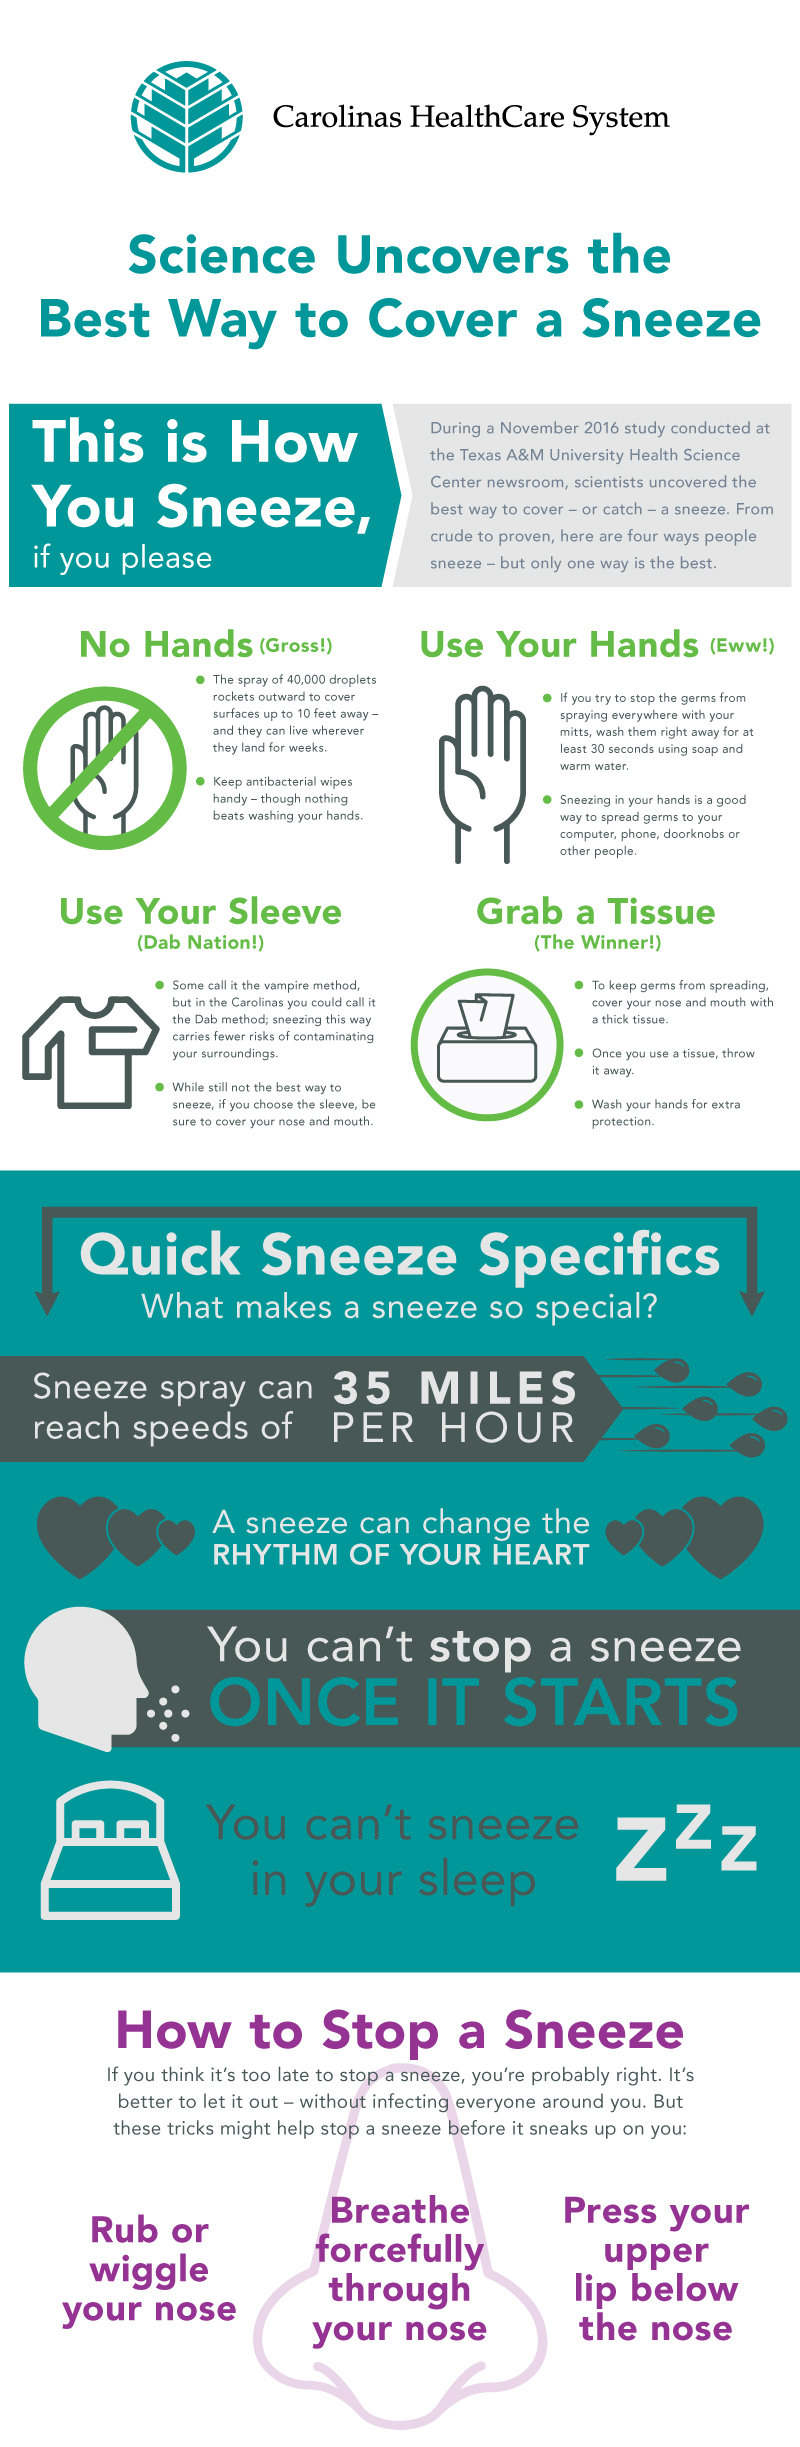 Daily Dose - science uncovers the best way to cover a sneeze